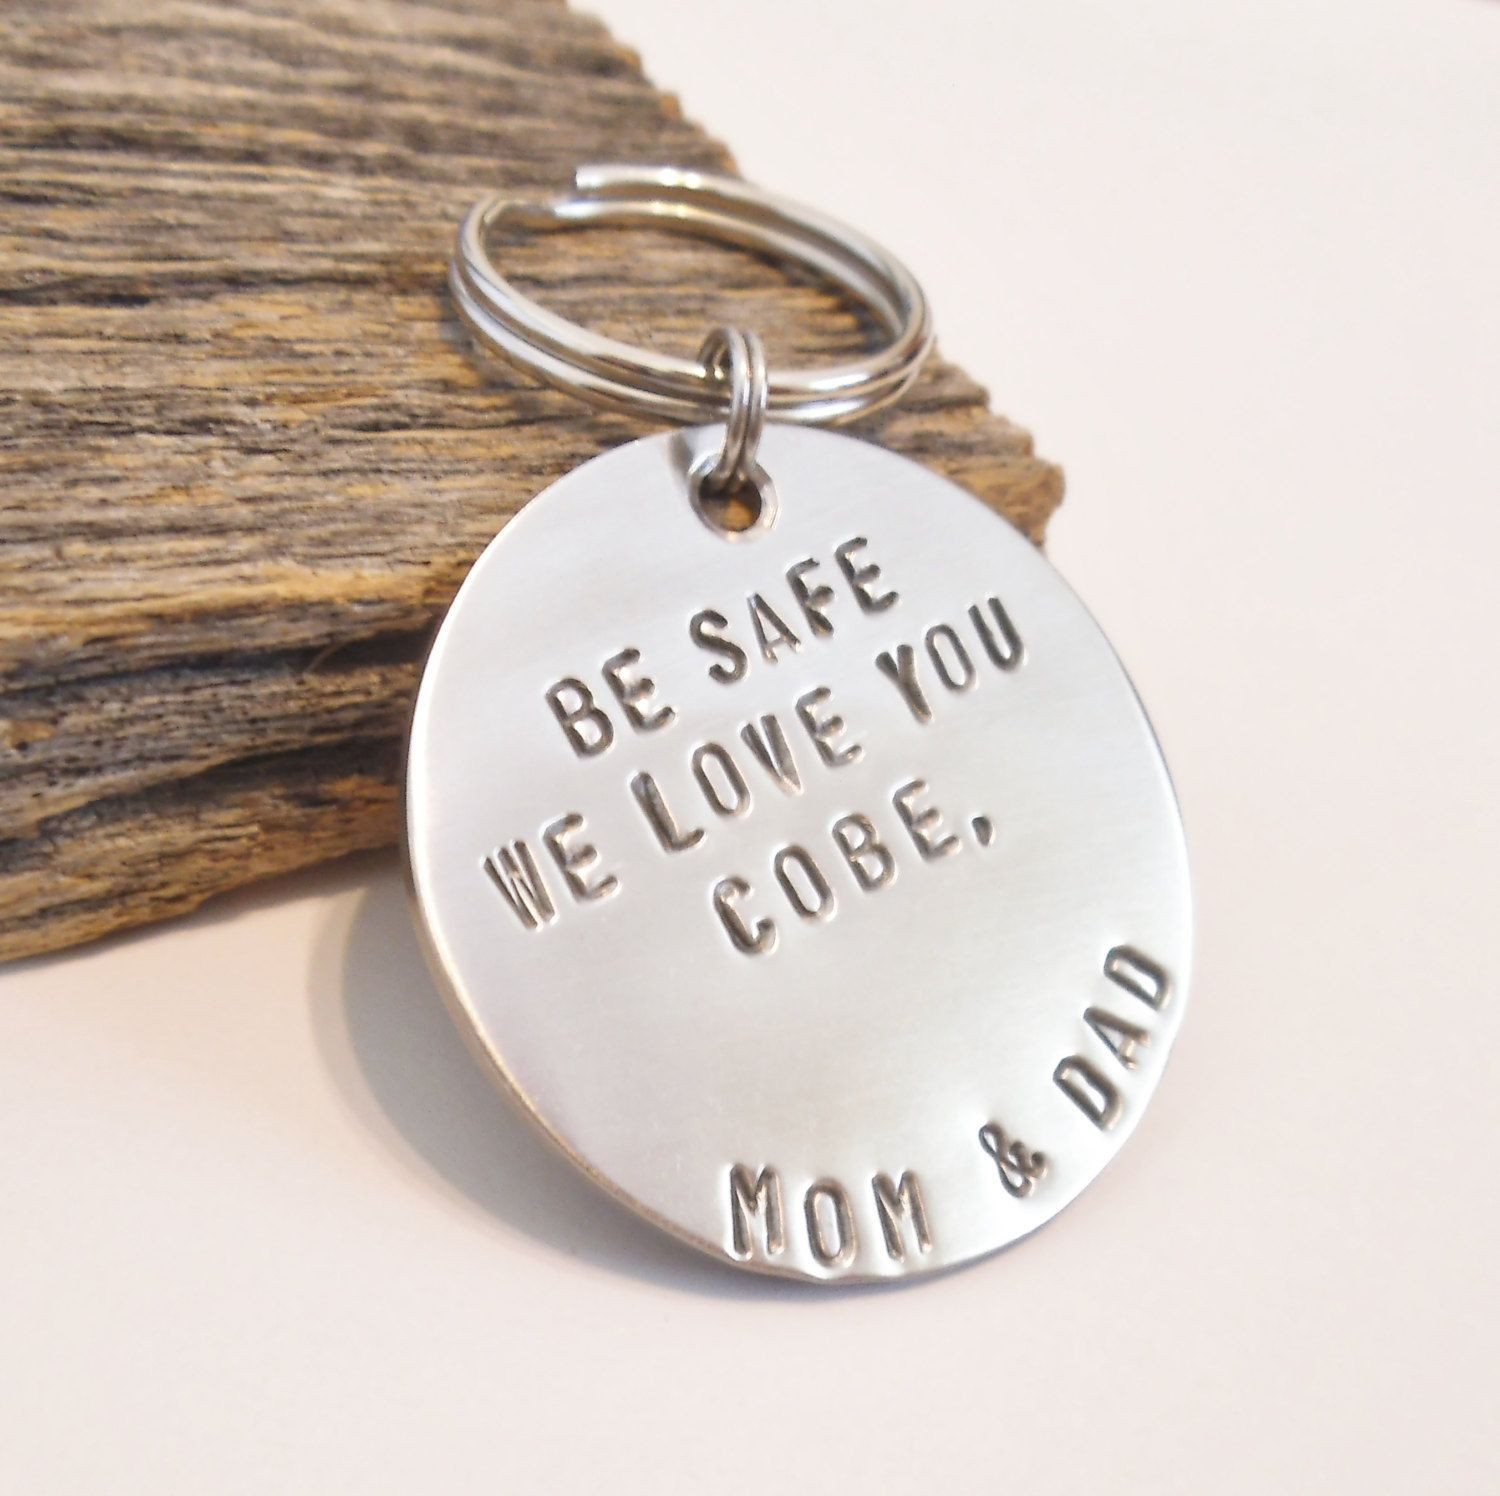 College Graduation Gift Ideas For Son
 25 Best Ideas High School Graduation Gift Ideas for son